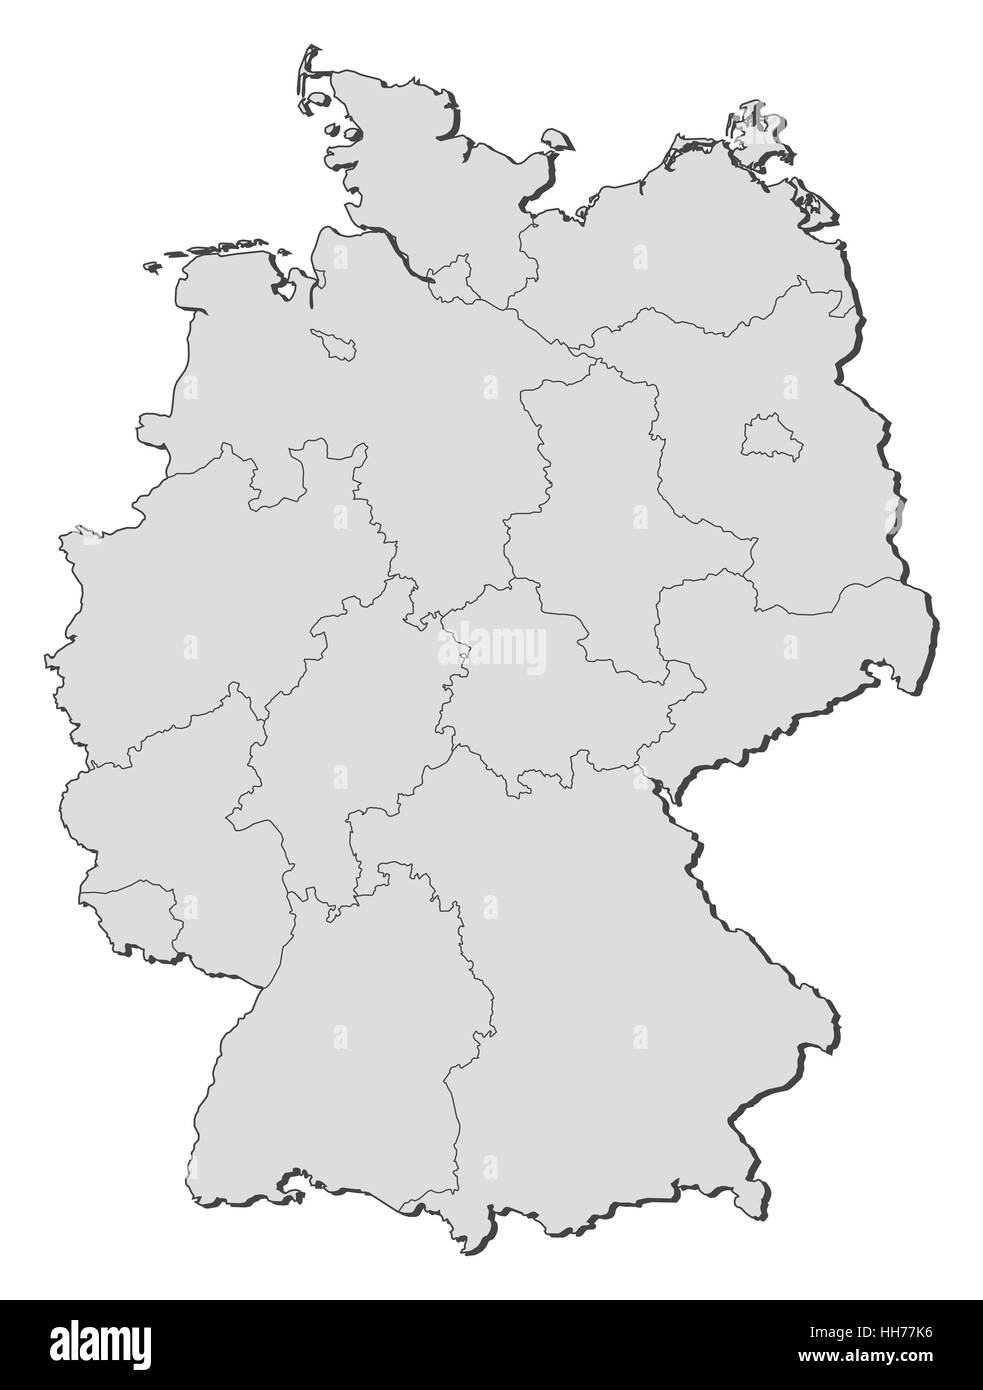 Political map of Germany with the several states. Stock Photo